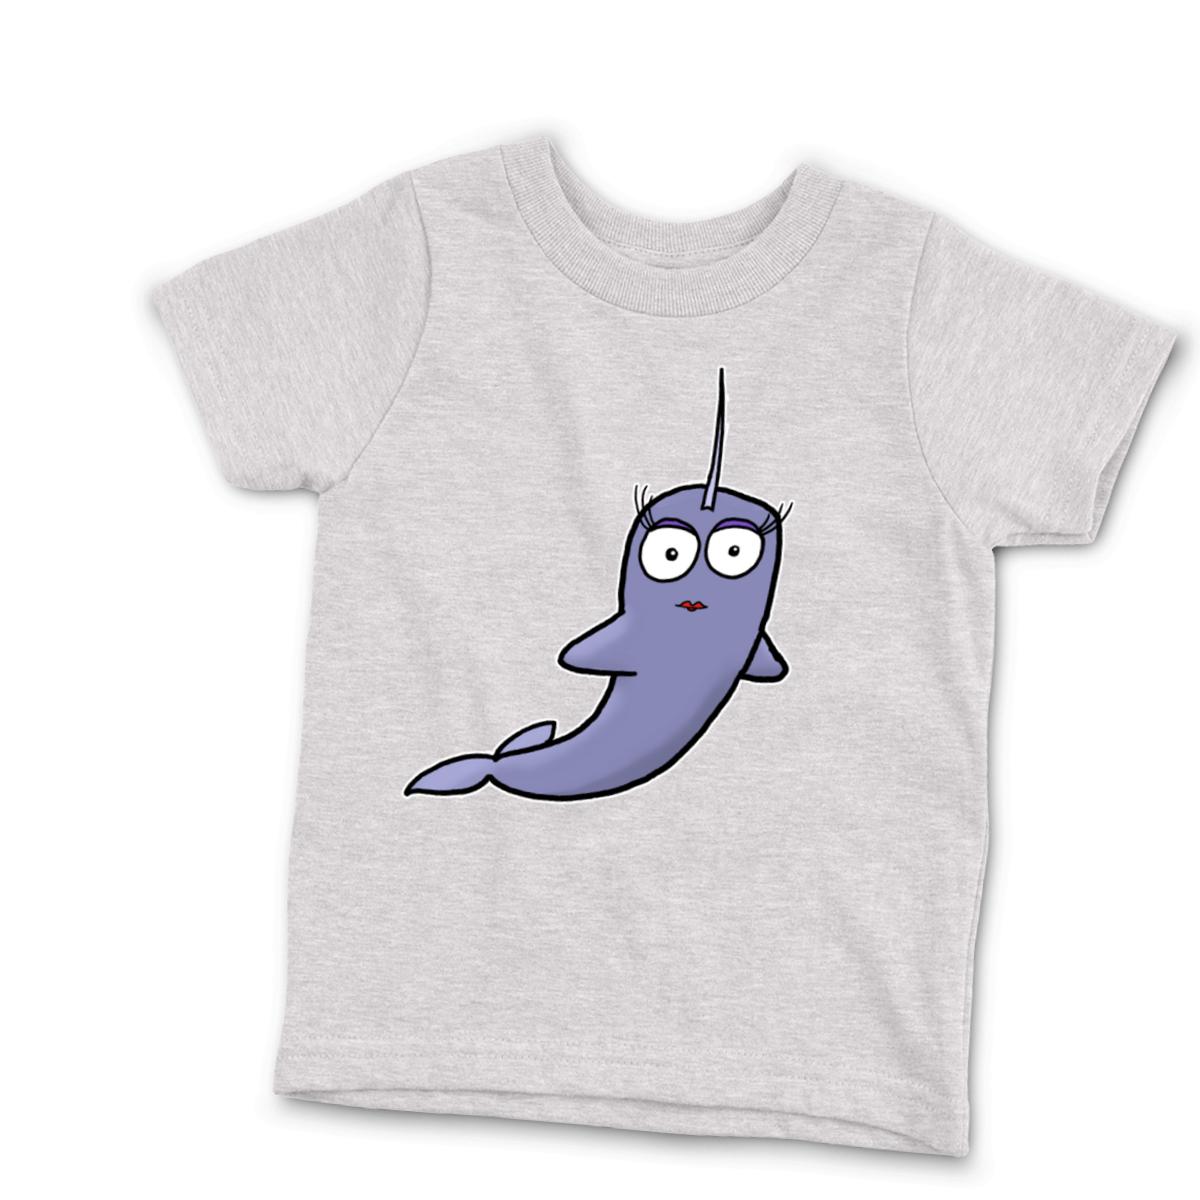 Narwhal Kid's Tee Large heather